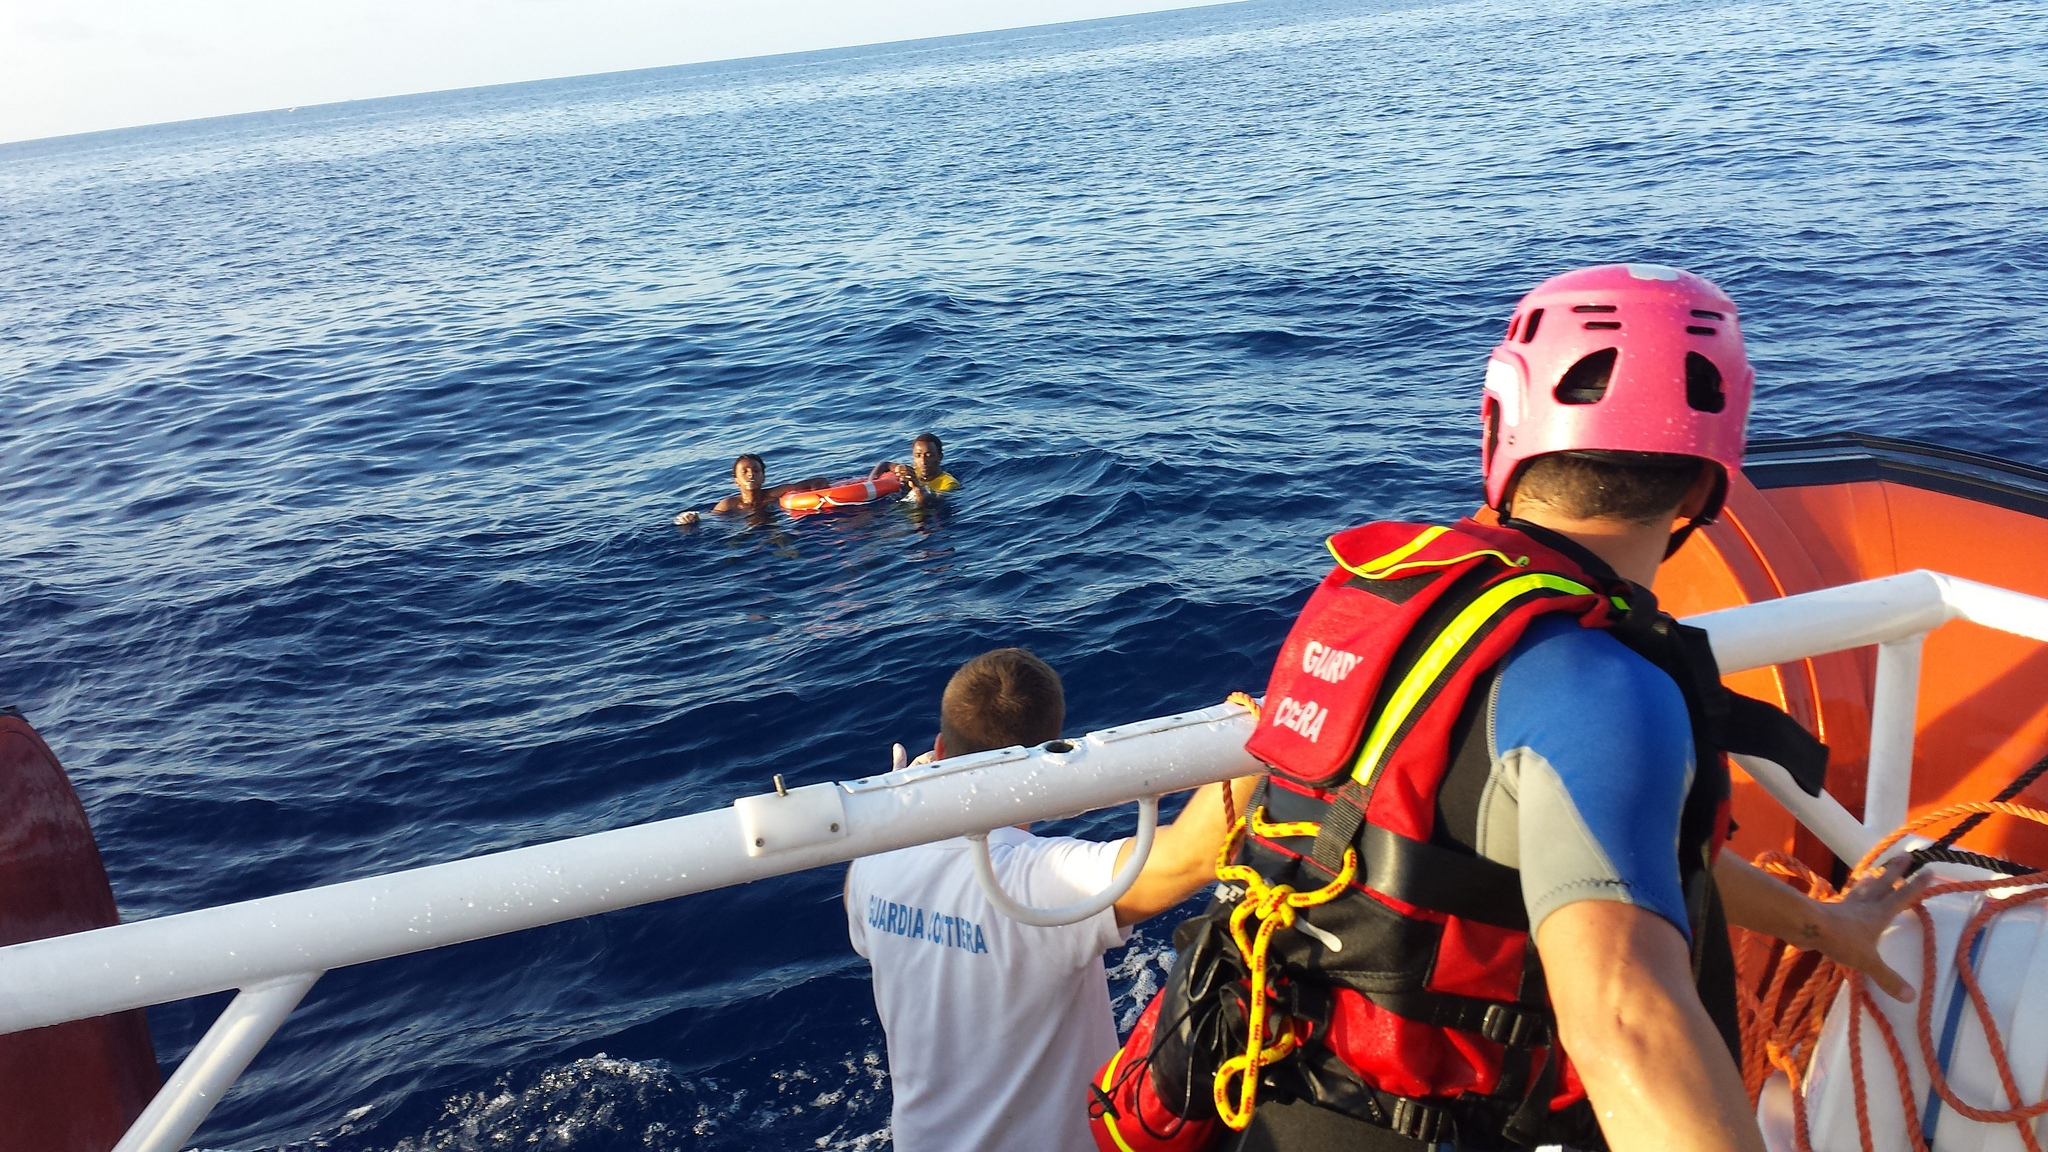 The Italian coastguard rescues two of the 156 survivors of the October 3 tragedy off Lampedusa Island. Photo by UNHCR under CC BY-NC 2.0